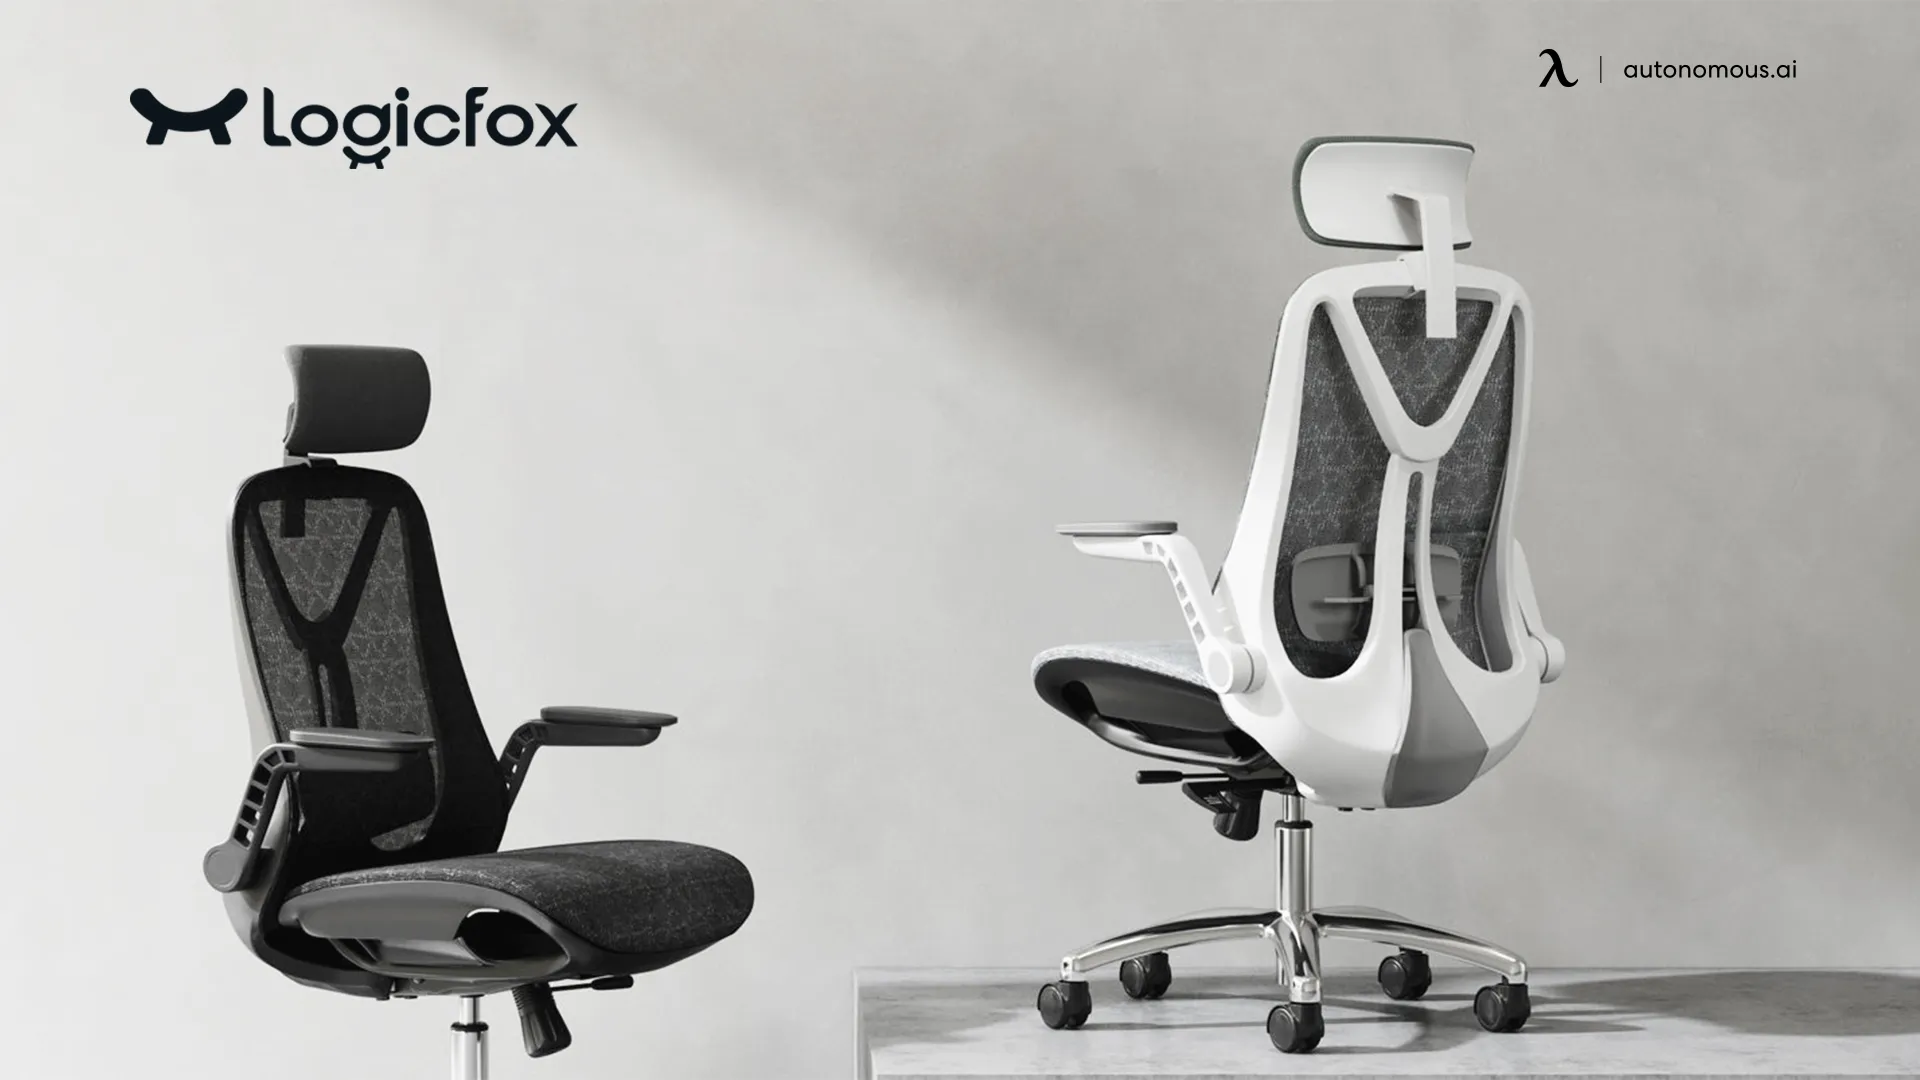 Logicfox - furniture stores for Black Friday